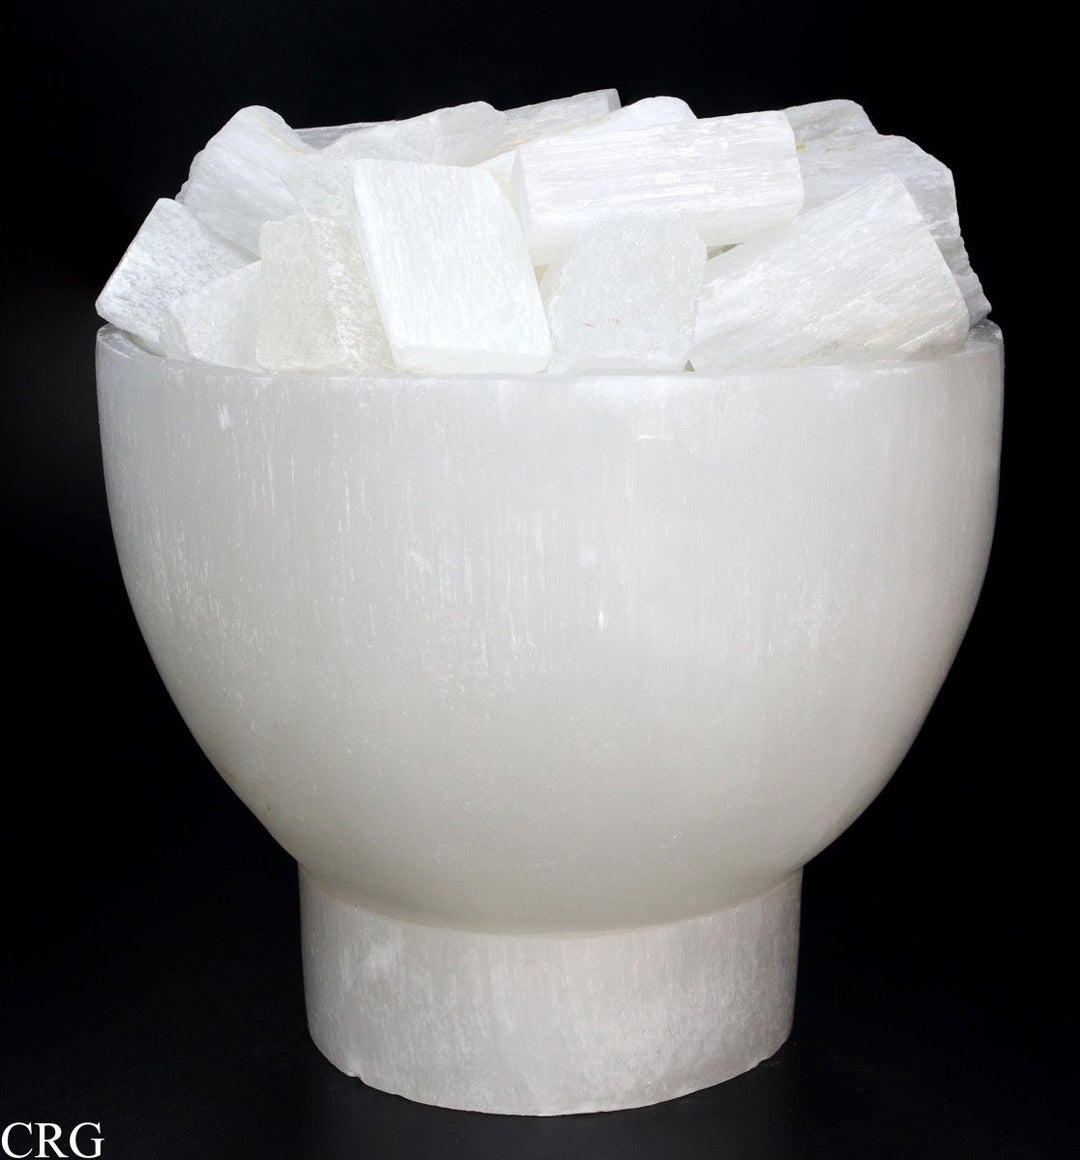 Selenite White "Fire Bowl" Lamp with Cord and Bulb (1 Piece) Size 6 to 8 by 4 Inches Crystal Gemstone Decor